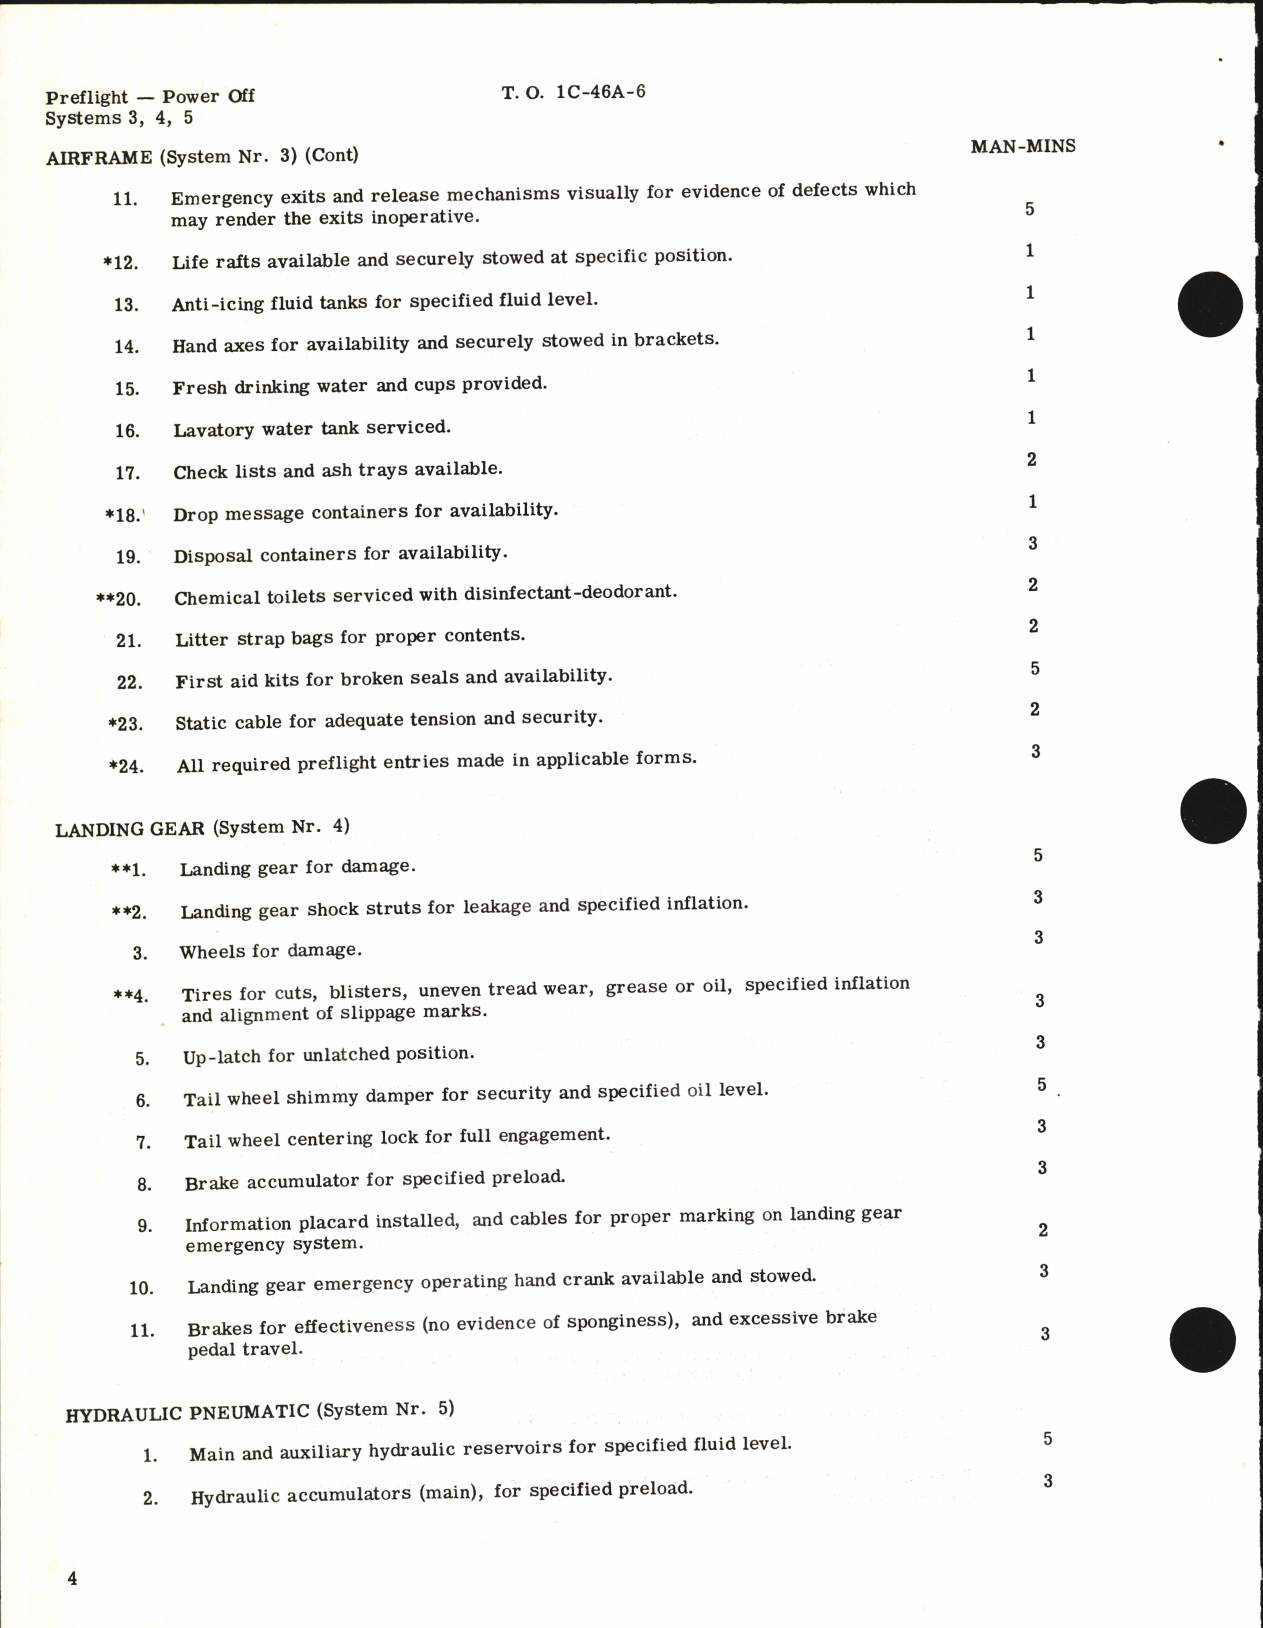 Sample page 6 from AirCorps Library document: Inspection Requirements for C-46A, C-46D, and C-46F Aircraft